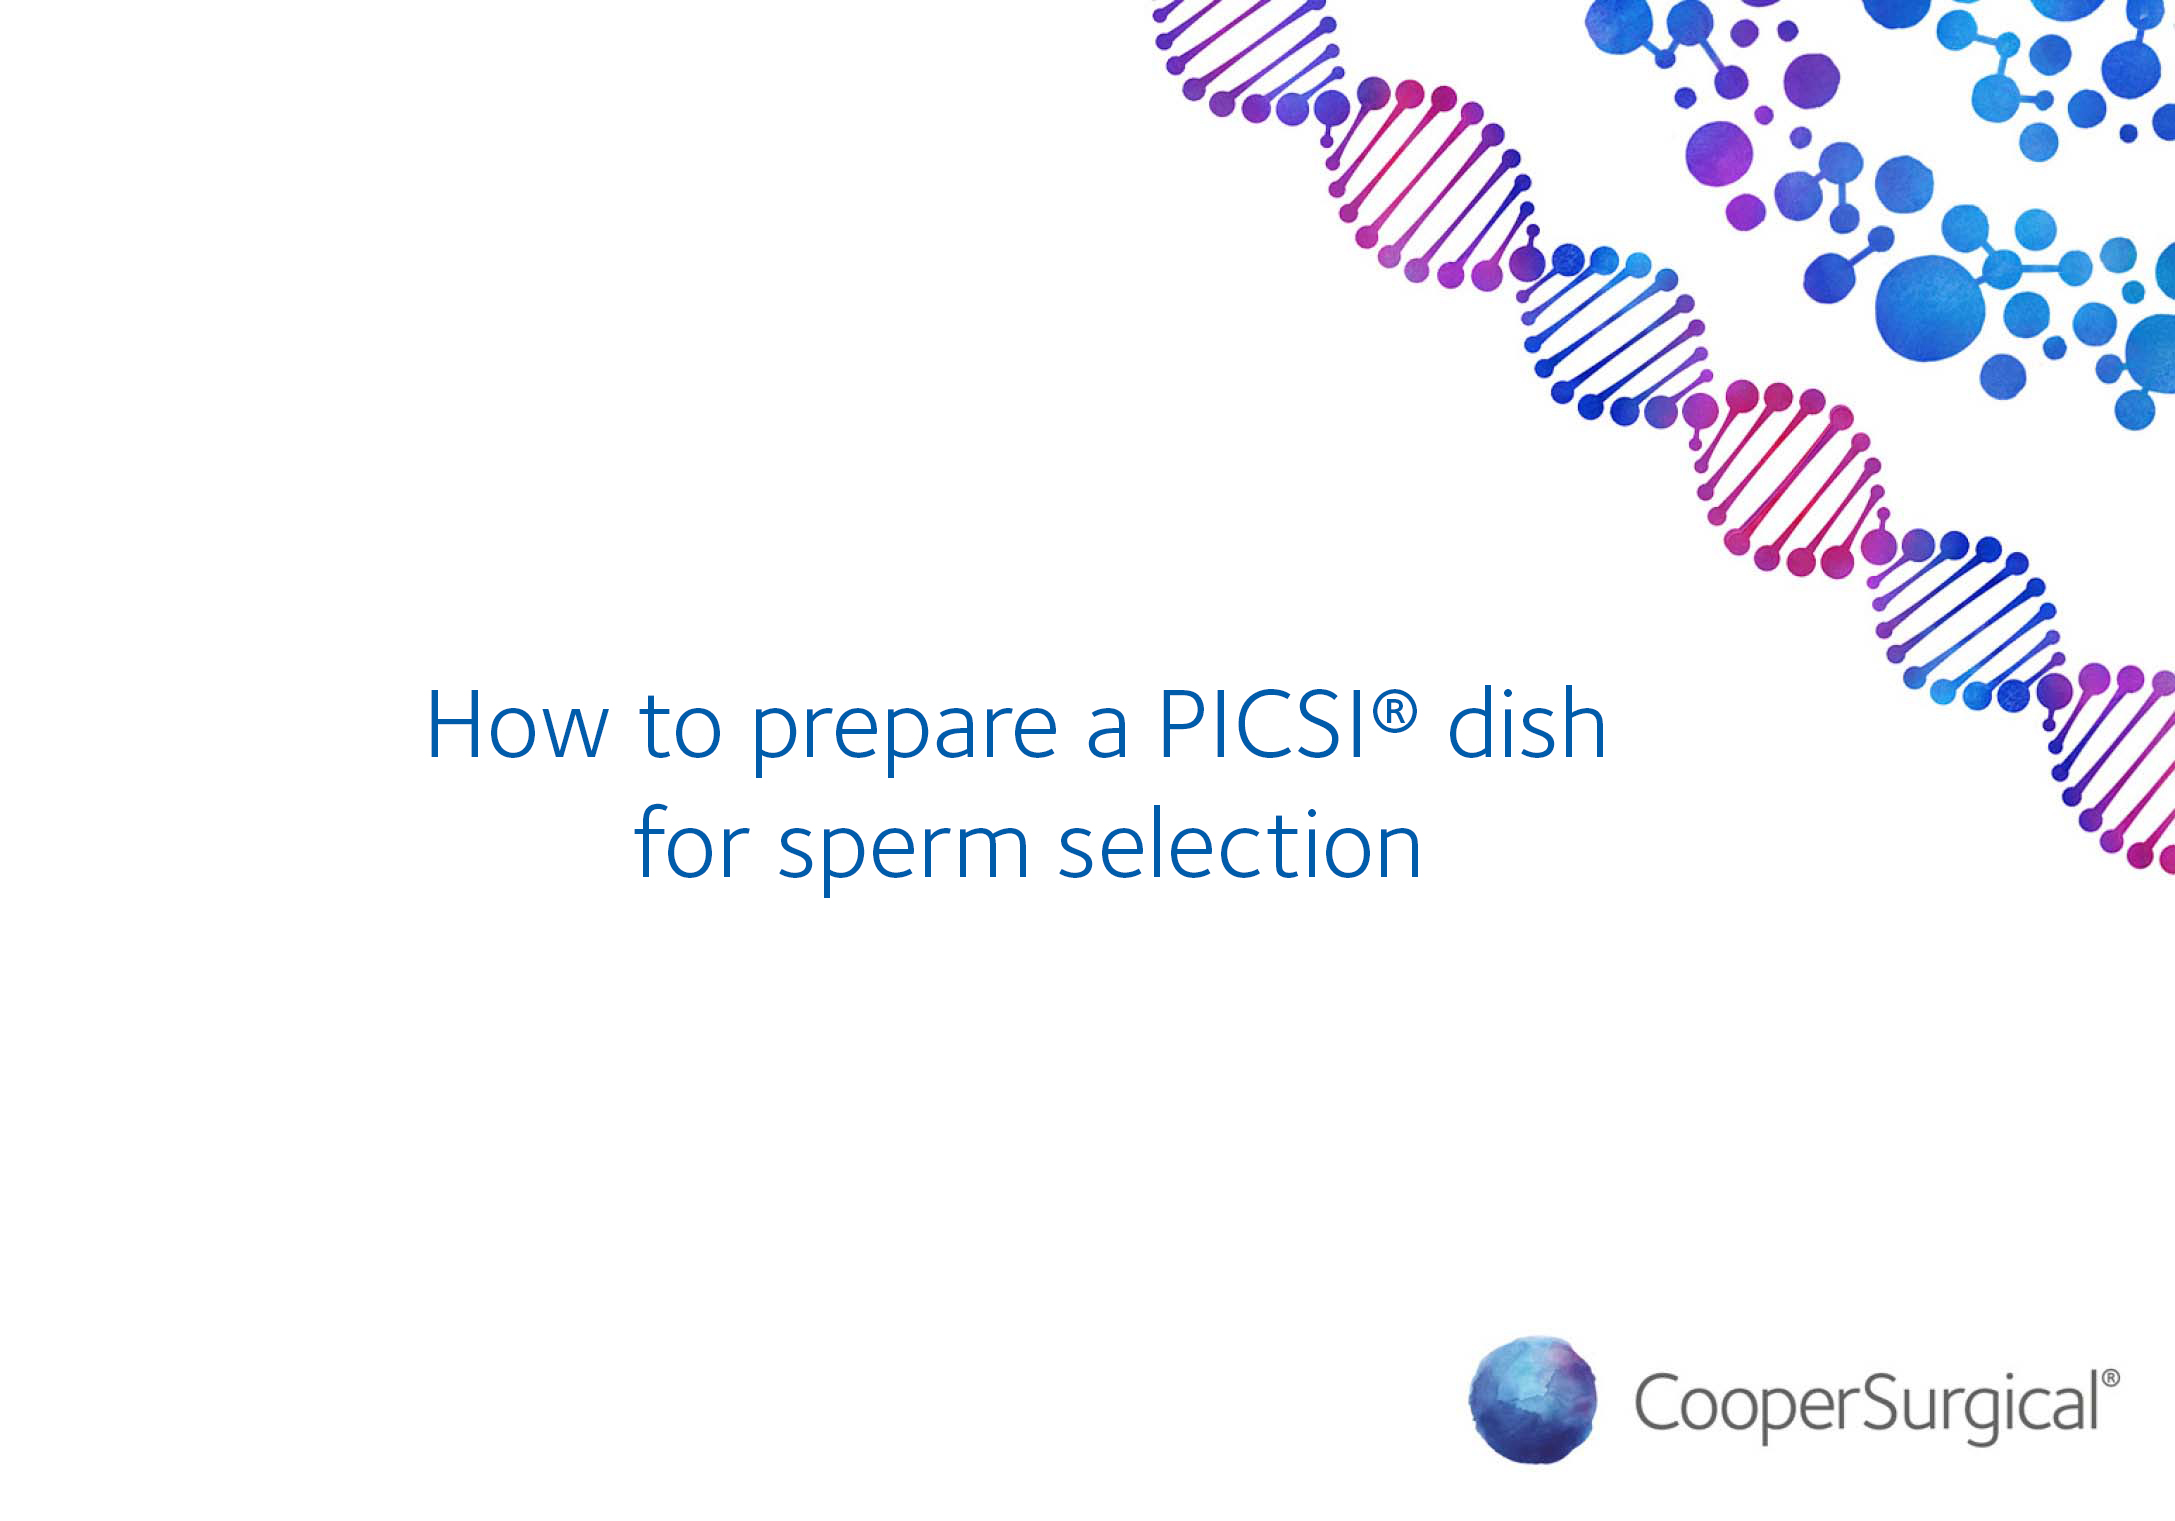 How to prepare a PICSI® dish for sperm selection